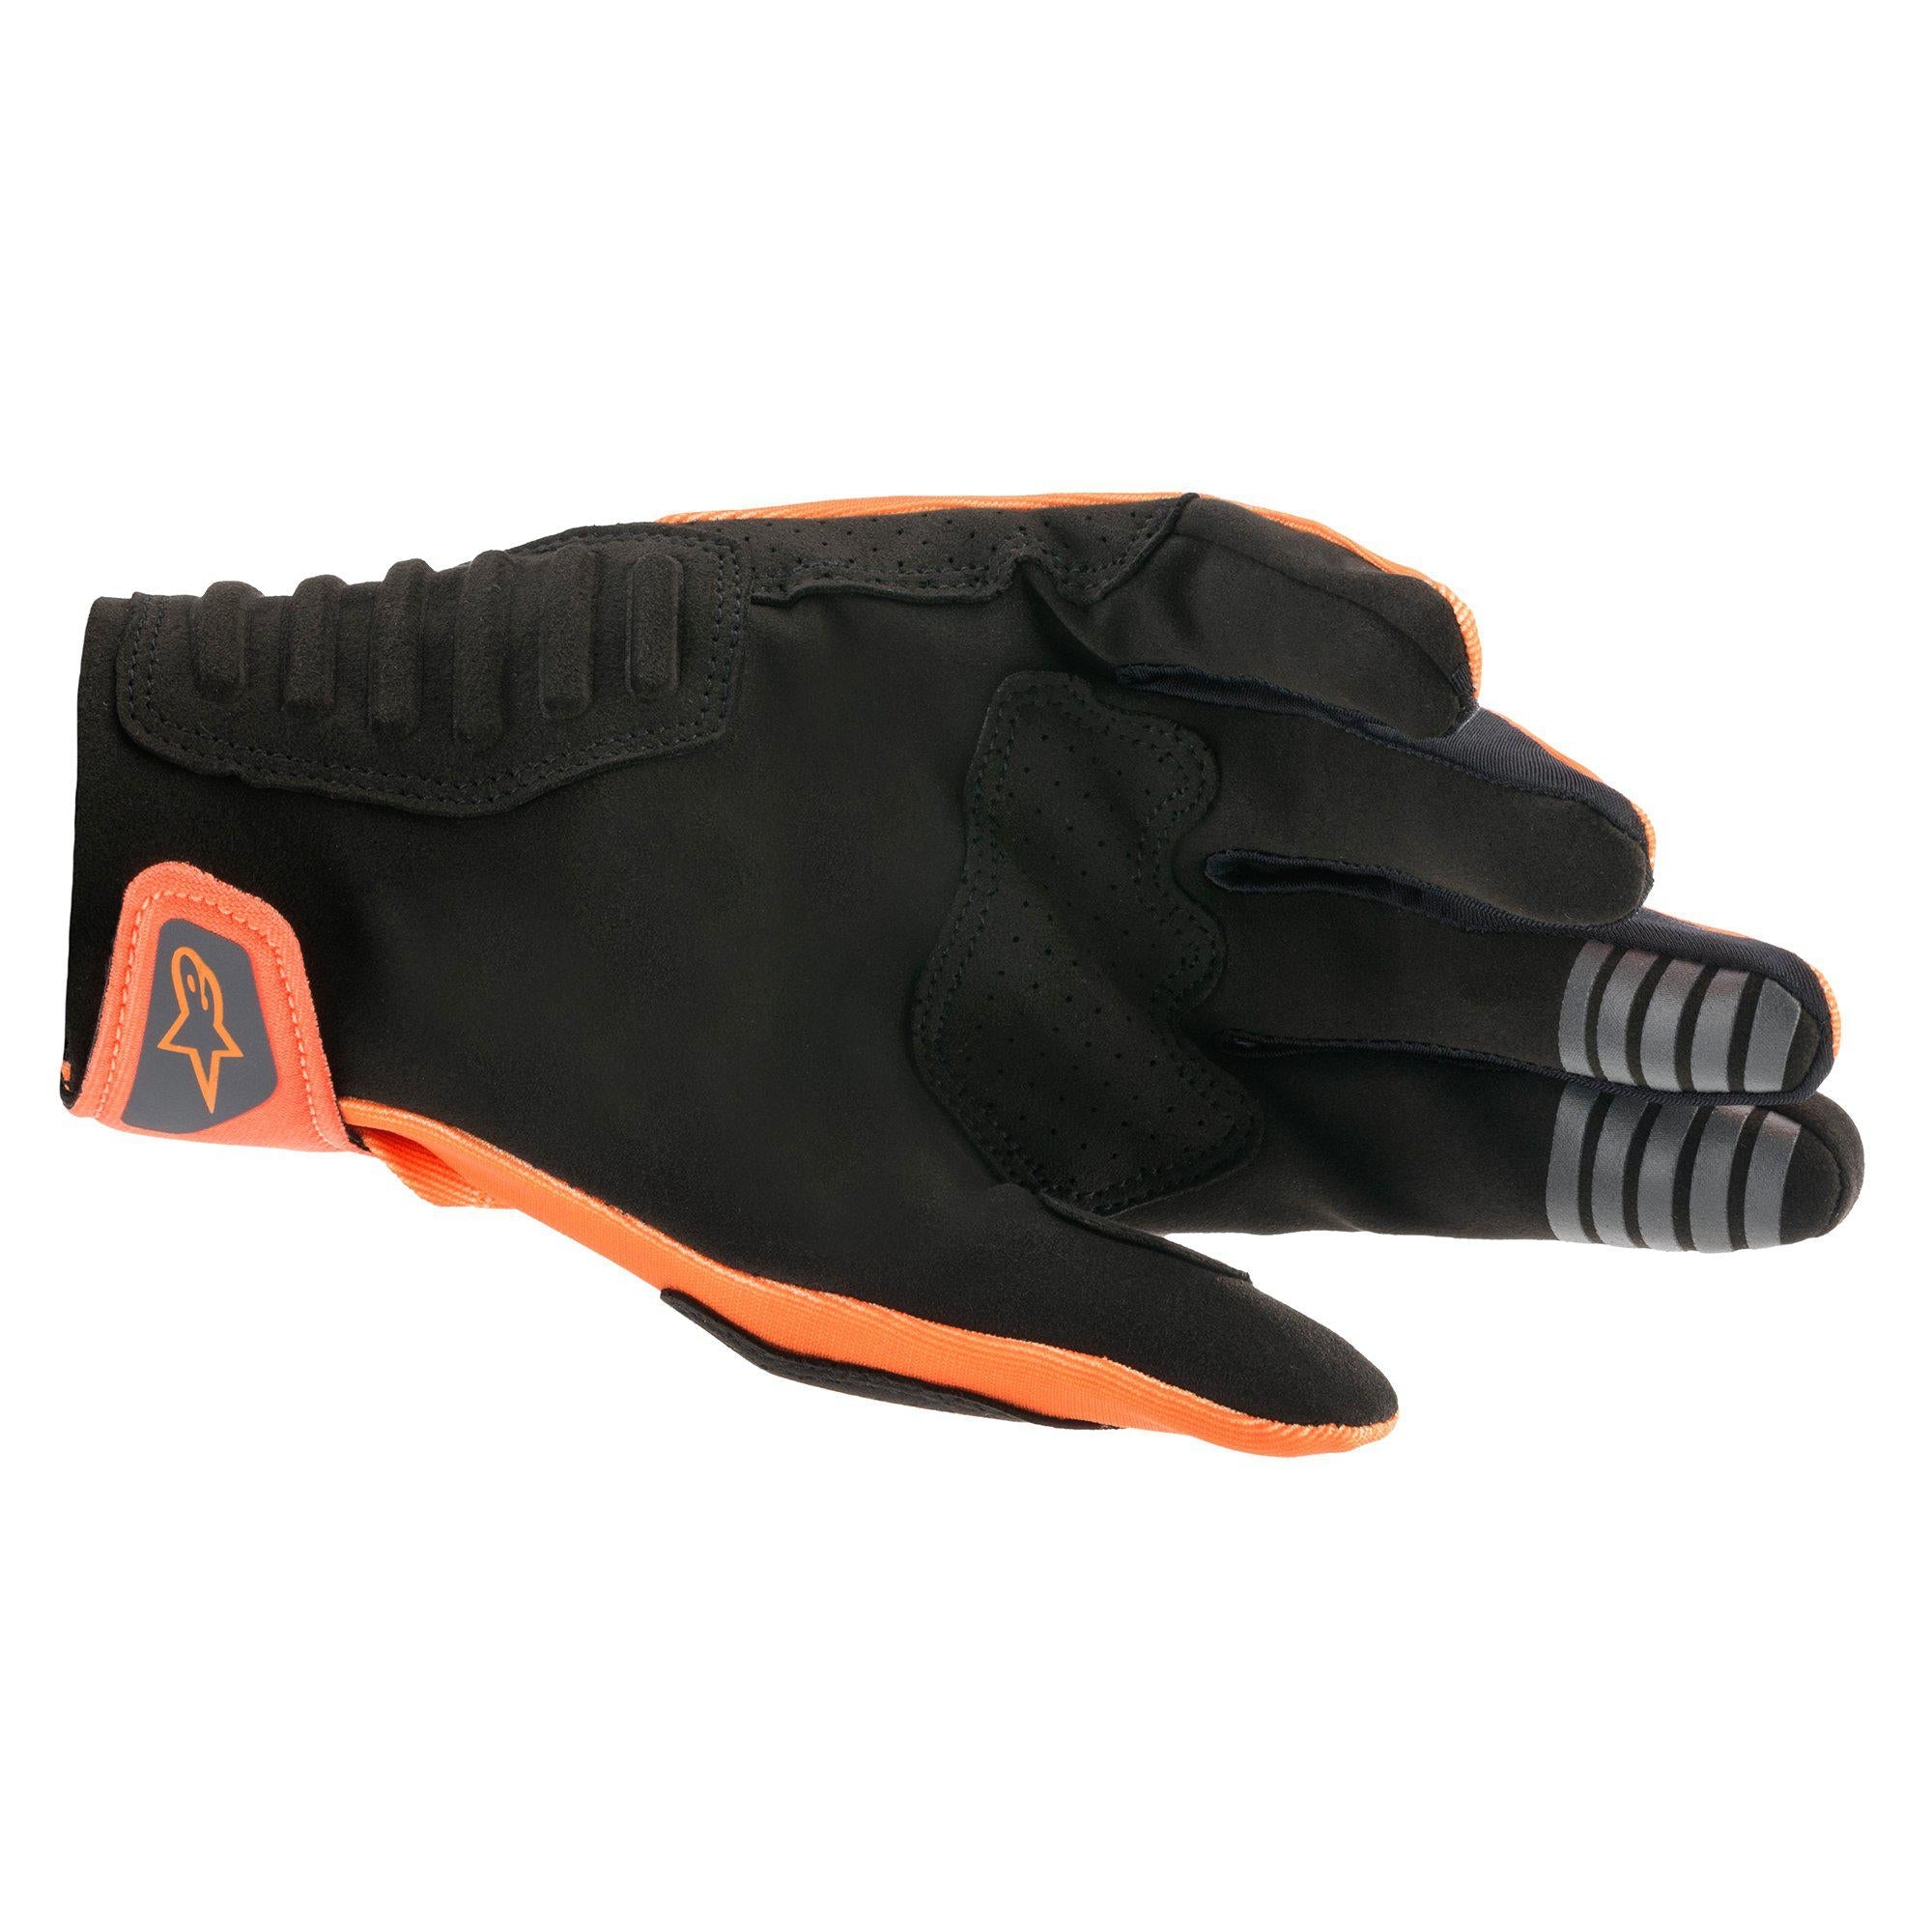 2021 SMX-E Offroad Gloves